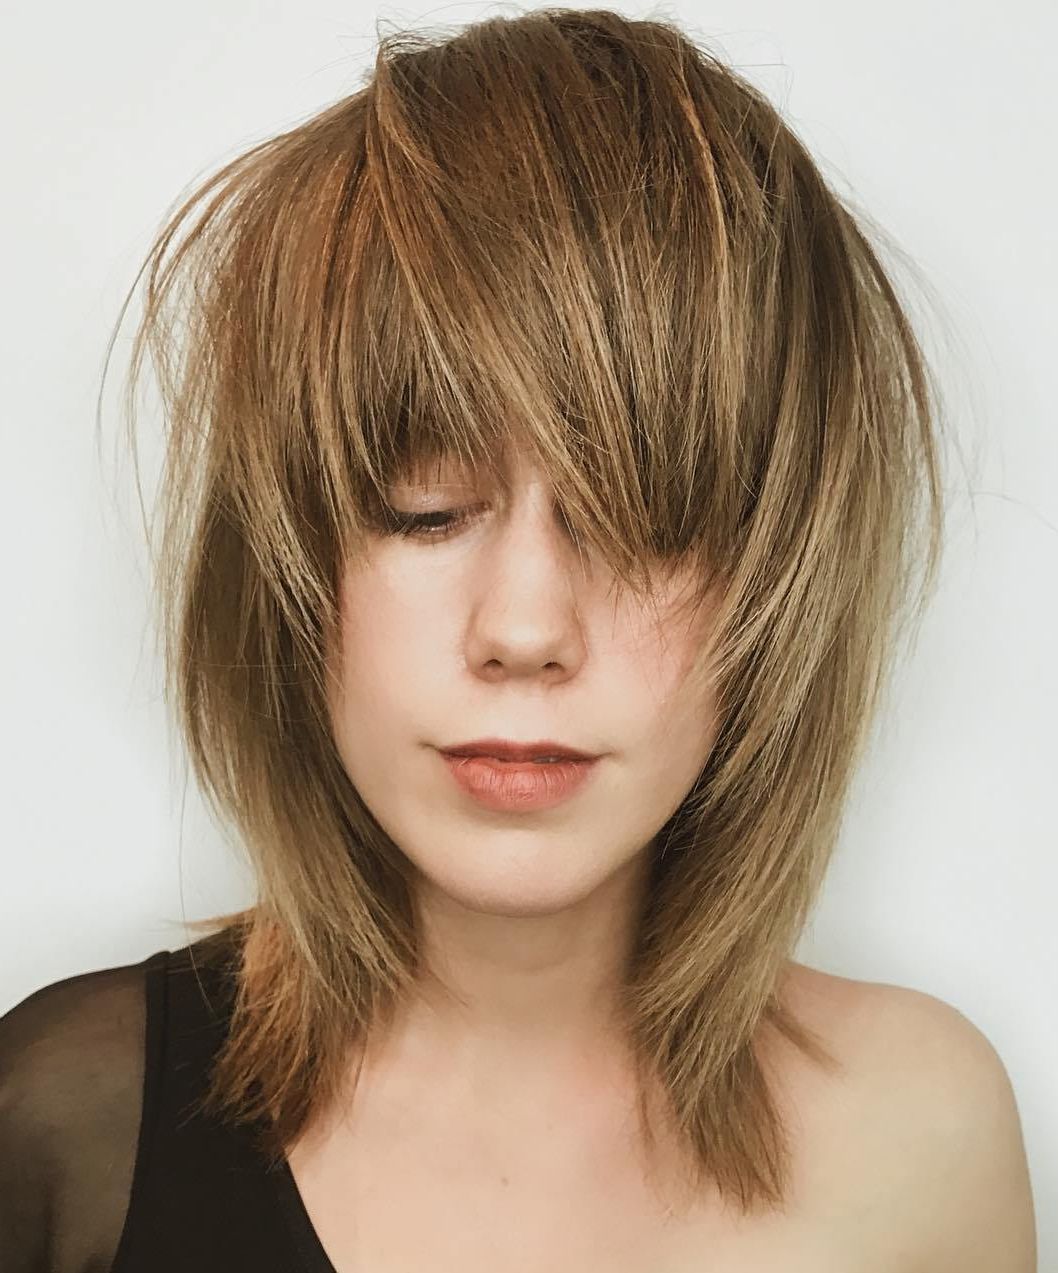 The Most Instagrammable Hairstyles With Bangs In 2019 Pertaining To Current Feminine Feathered Shag Haircuts For Medium Hair (View 6 of 20)